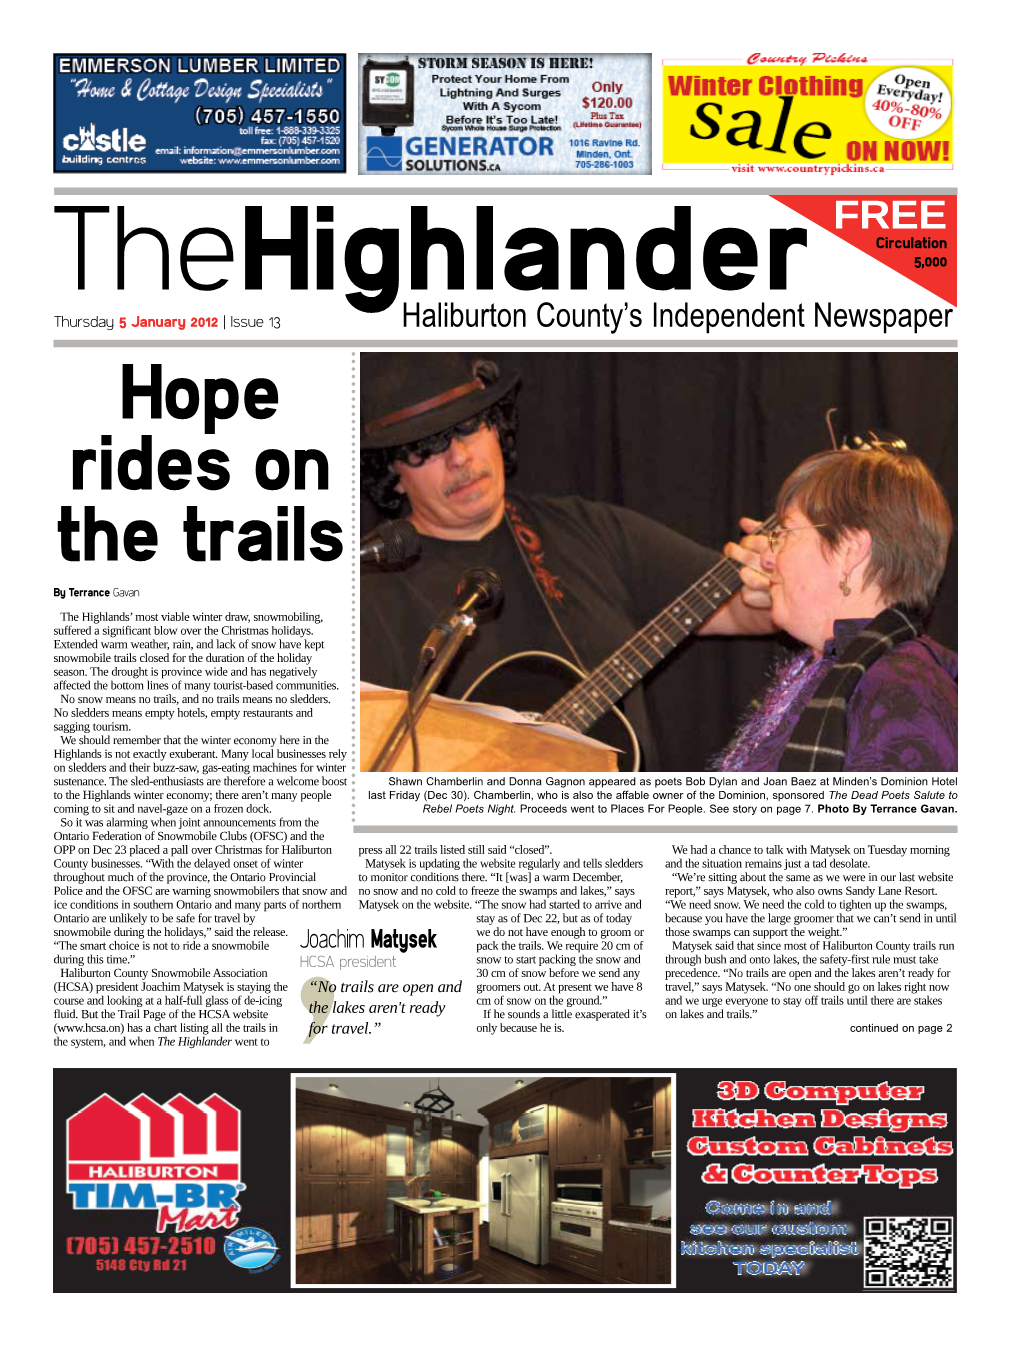 Hope Rides on the Trails by Terrance Gavan the Highlands’ Most Viable Winter Draw, Snowmobiling, Suffered a Significant Blow Over the Christmas Holidays